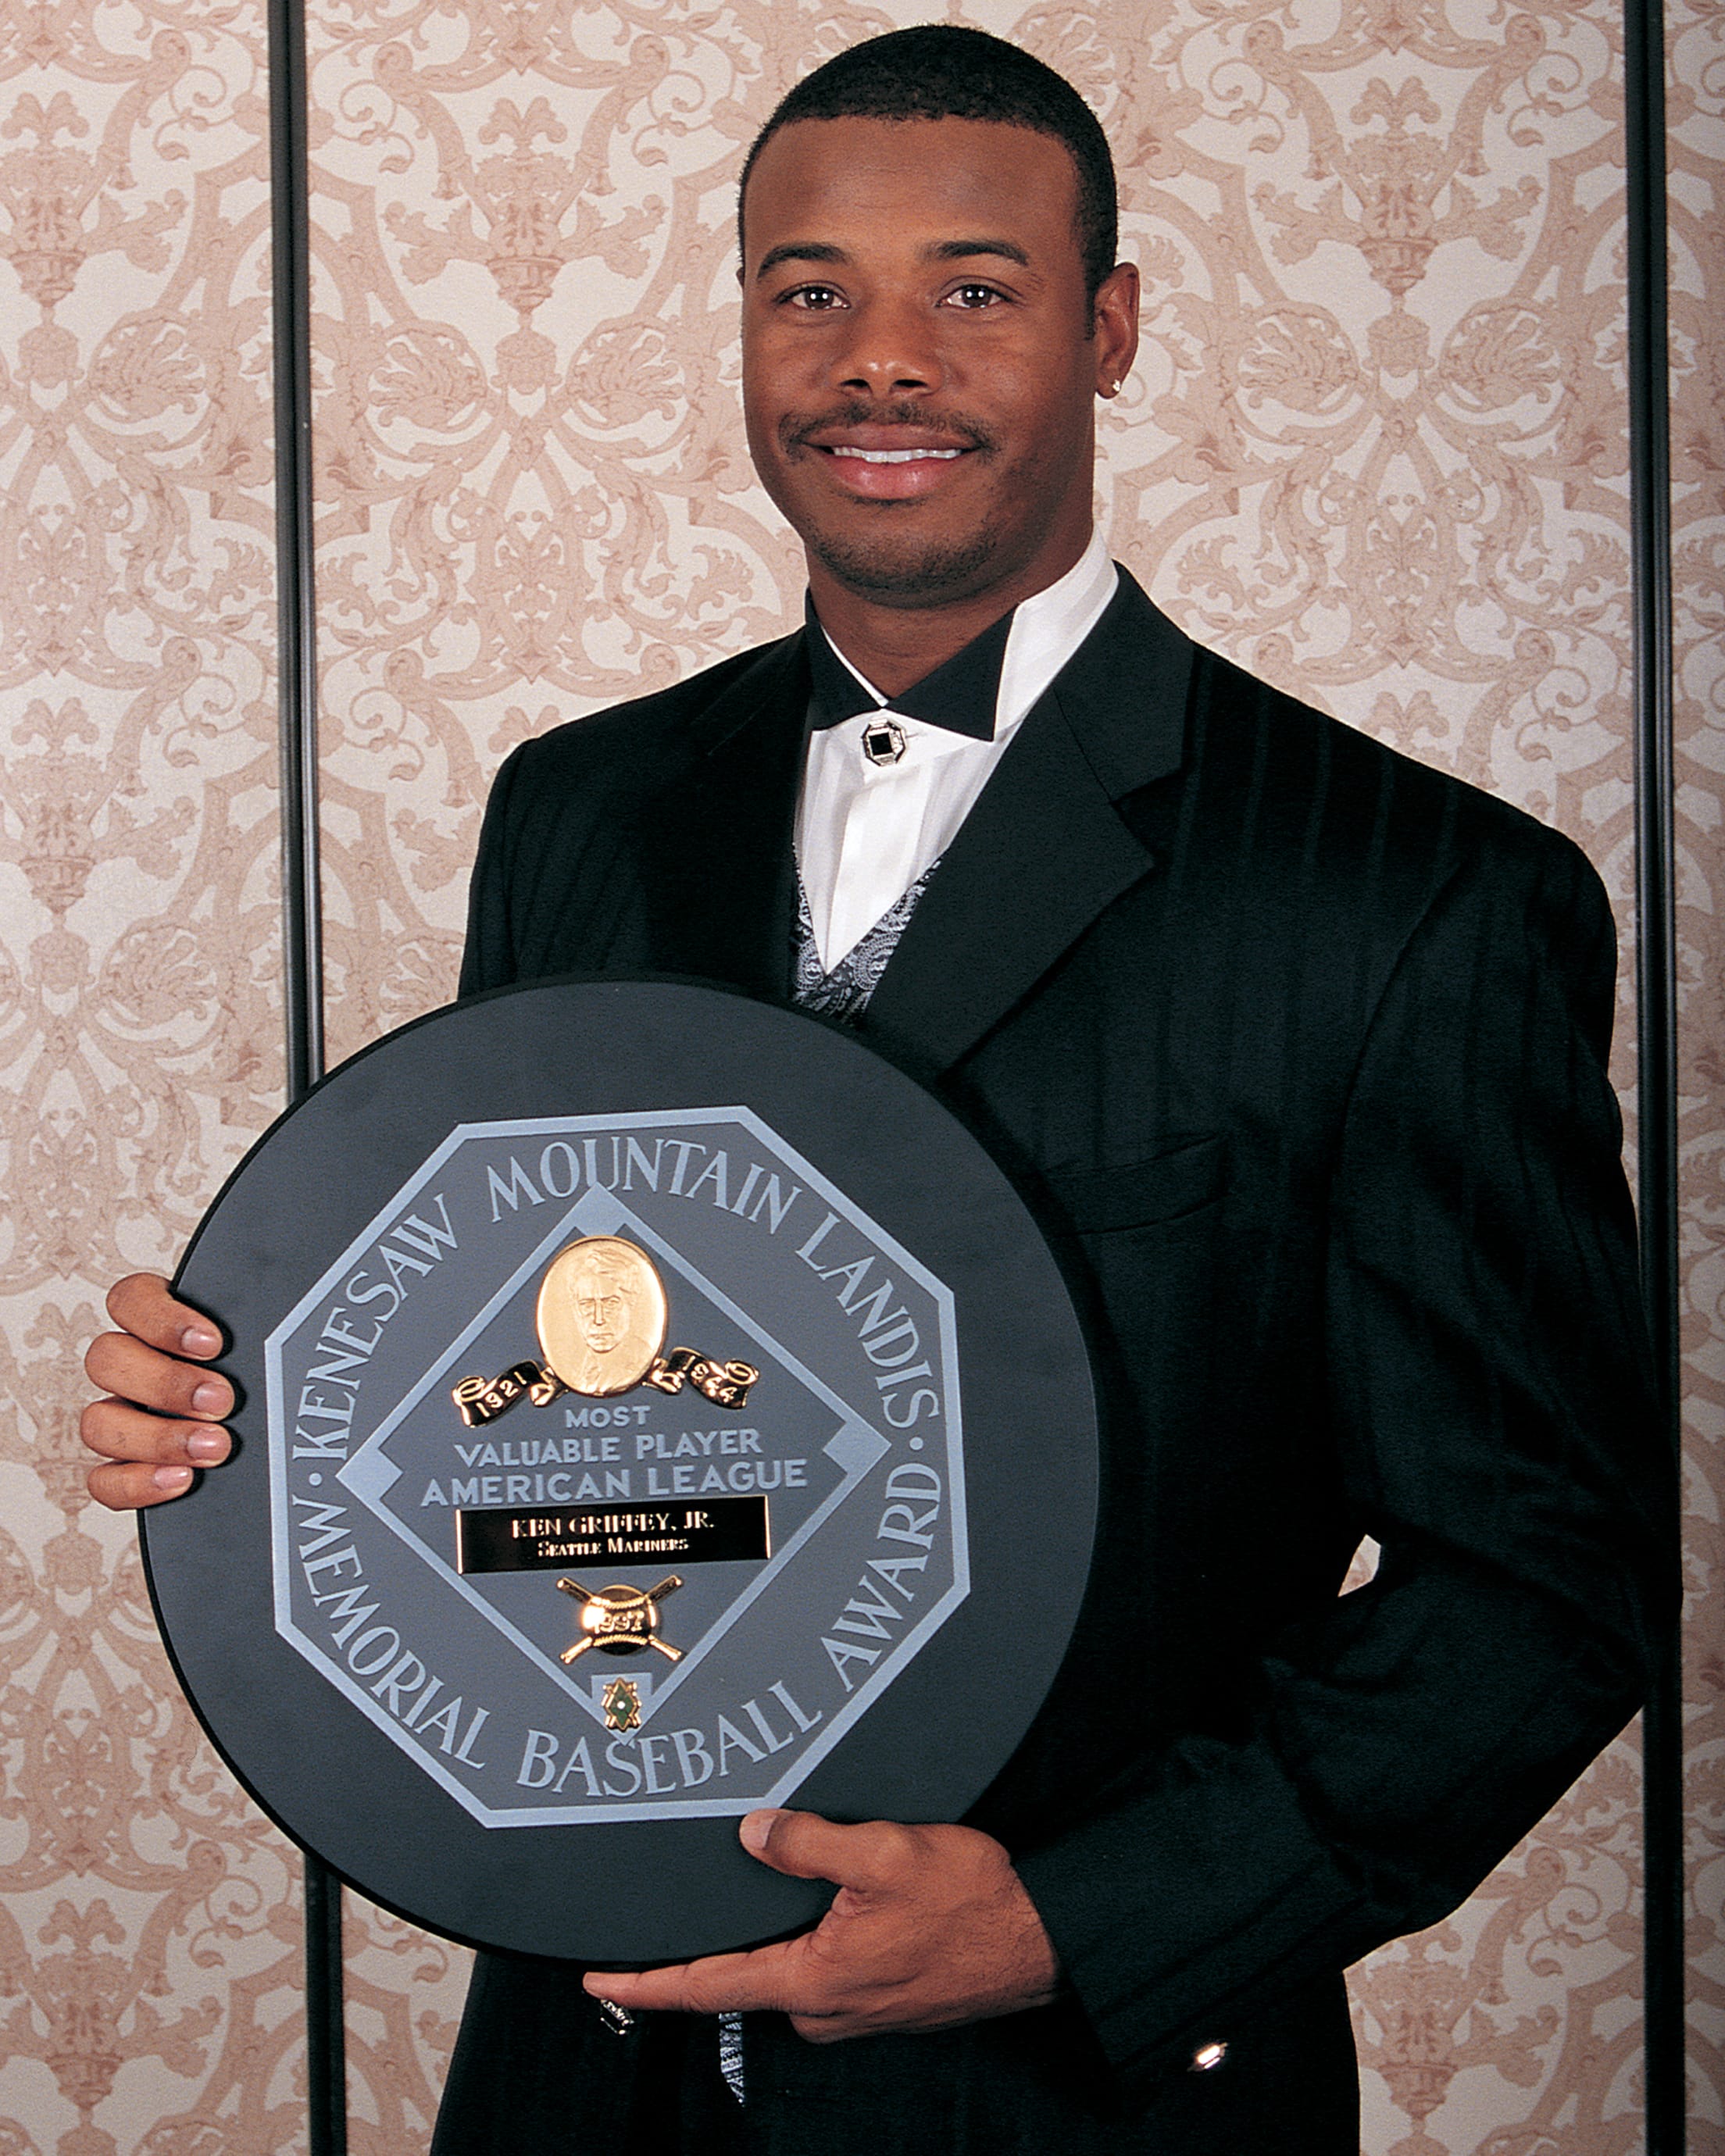 Griffey Jr. honored with achievement award